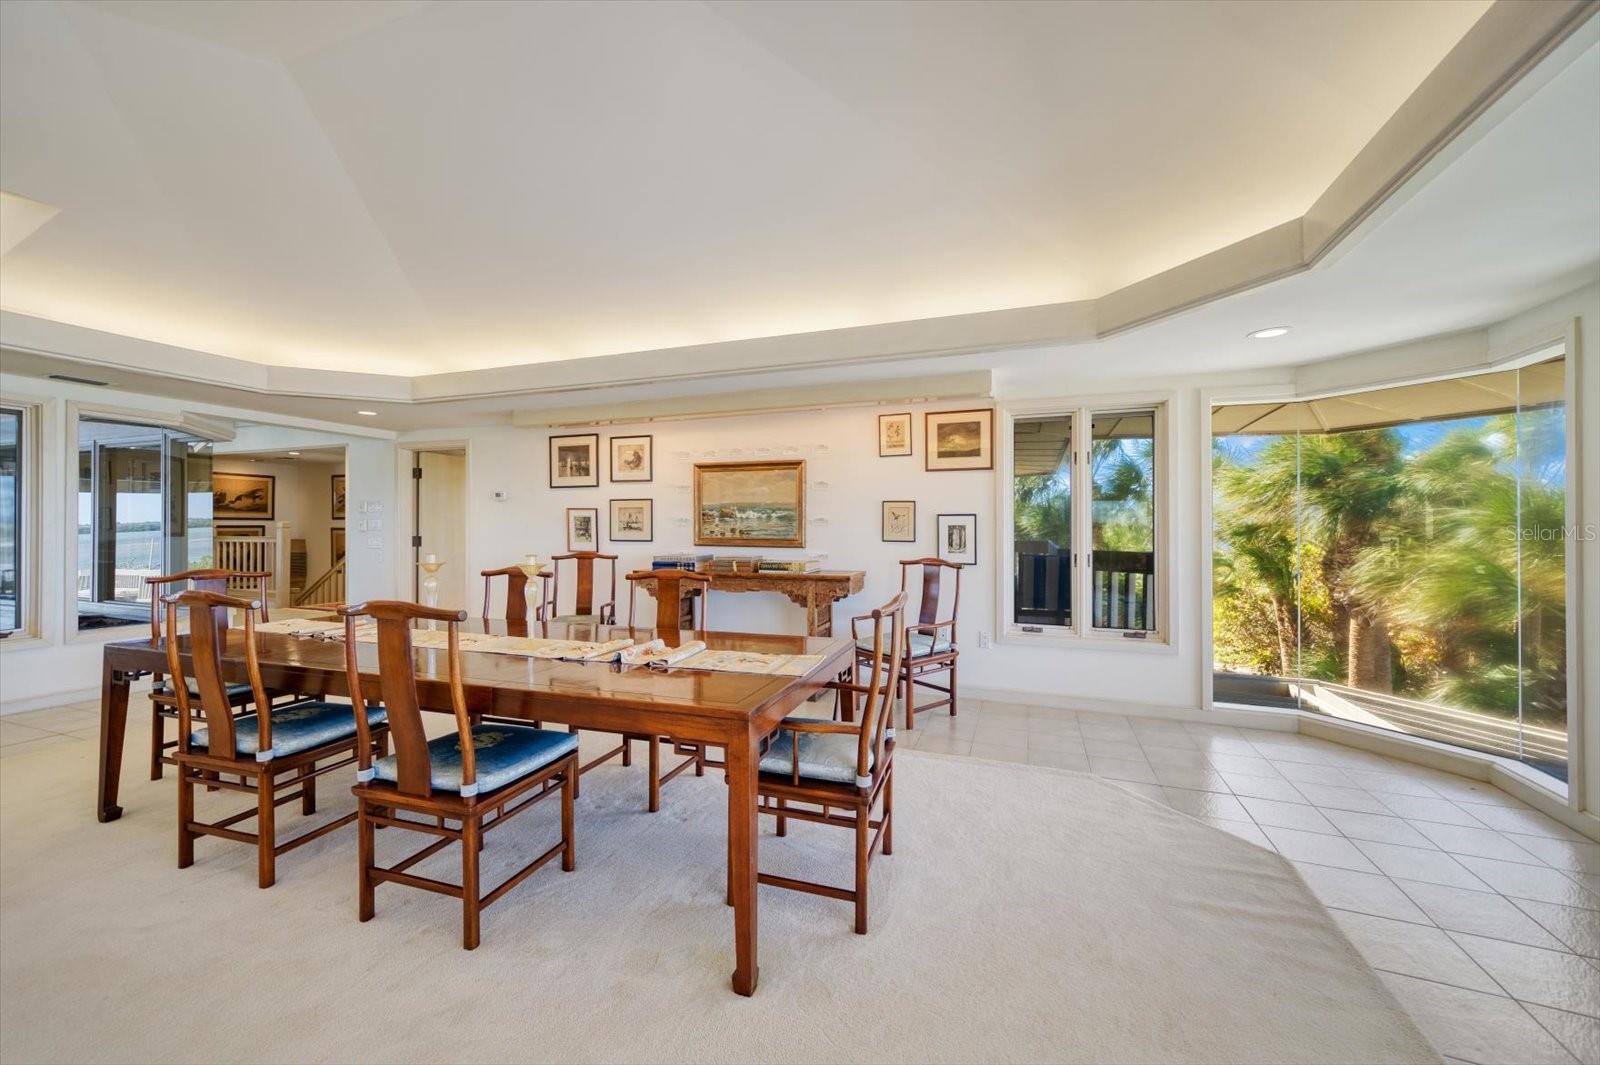 1198 MANDALAY POINT

                                                                             CLEARWATER                                

                                    , FL - $37,500,000